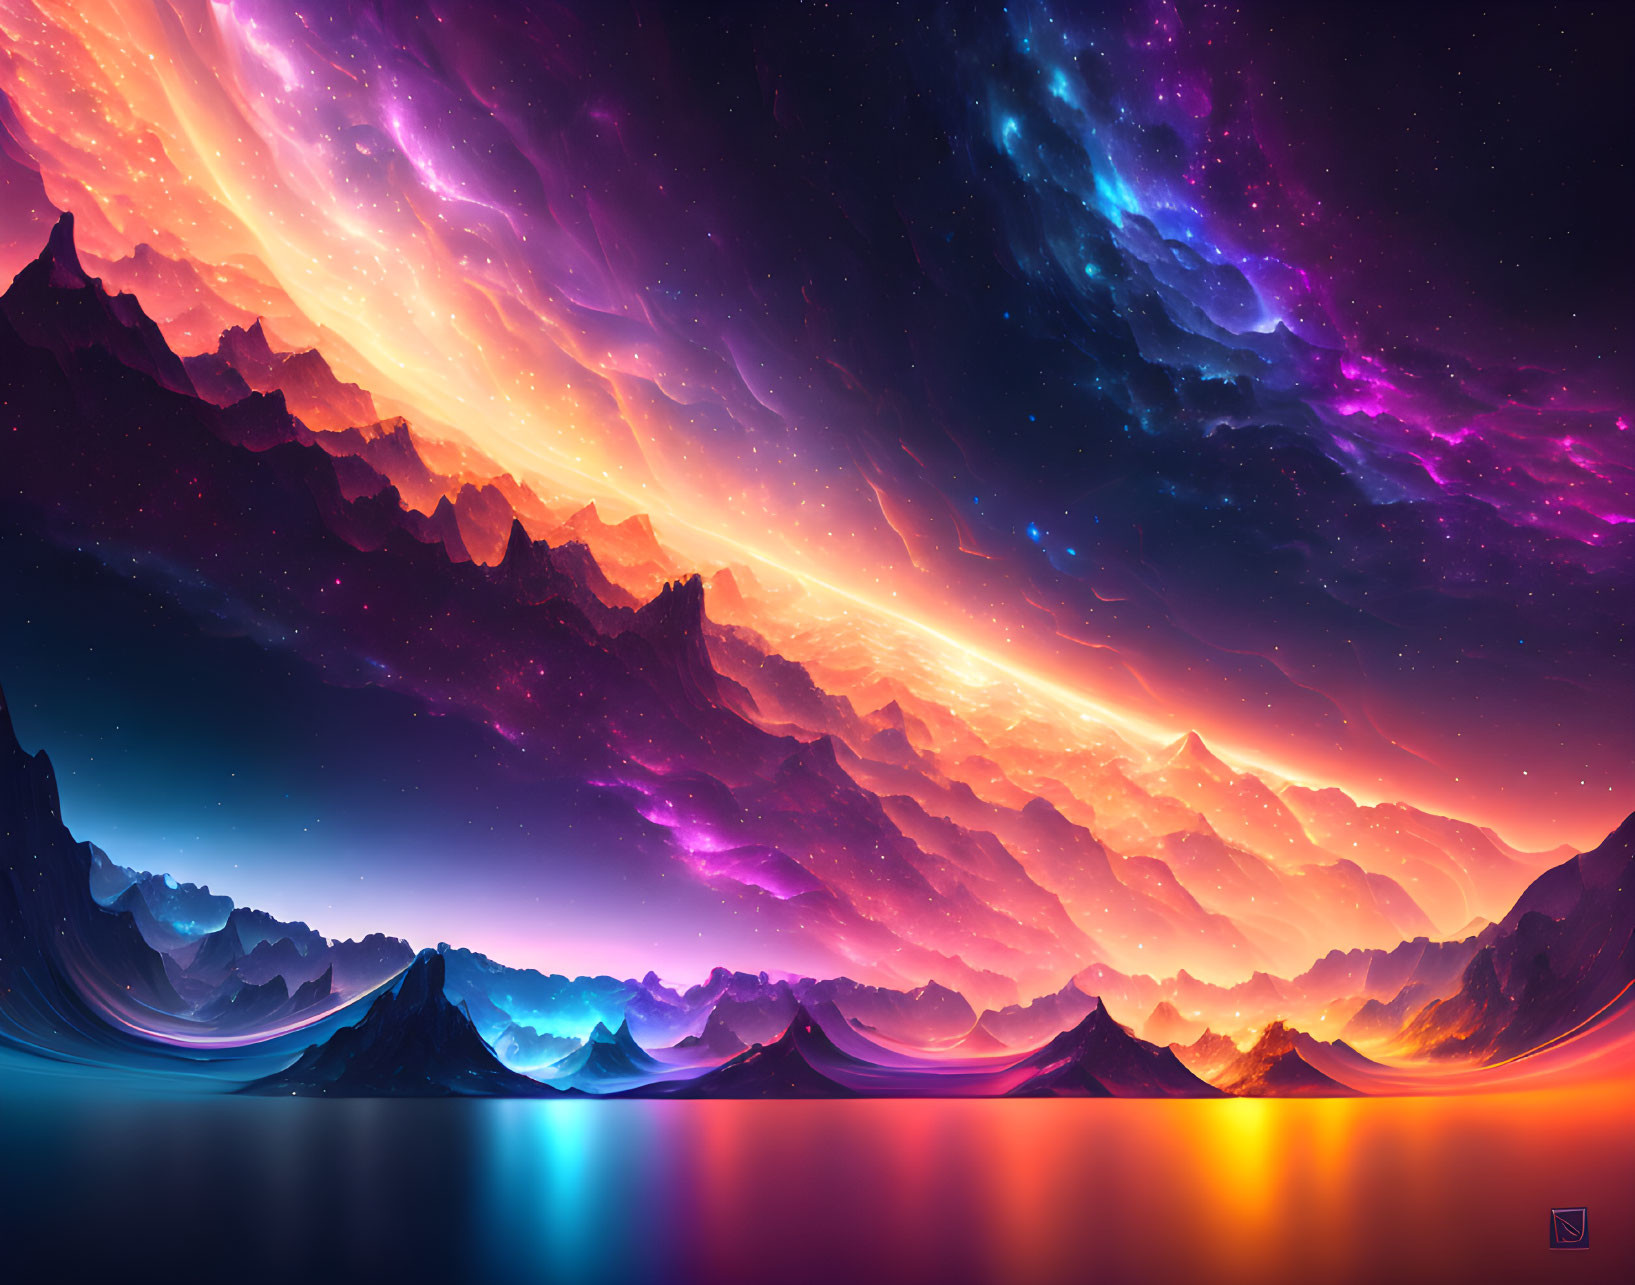 Colorful digital artwork: cosmic landscape, neon hues, dramatic mountains, reflective water, starry sky